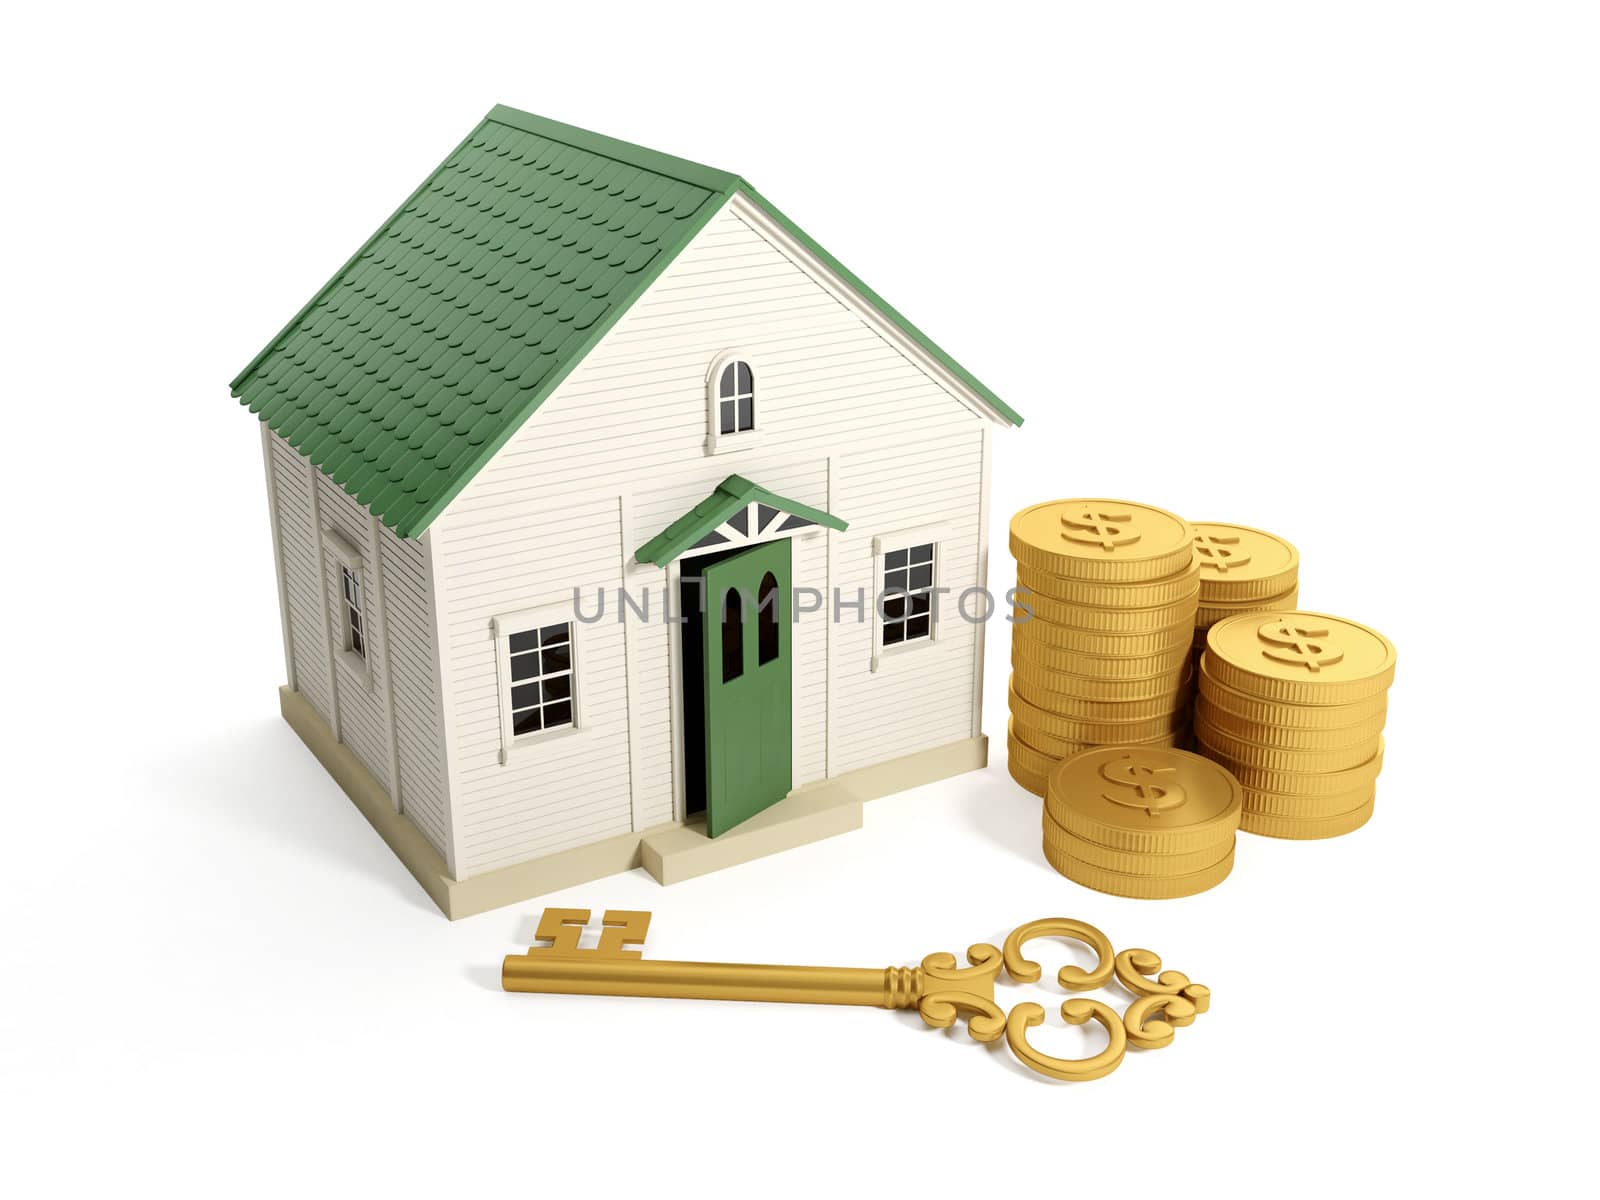 3d illustration: Buying a home, real estate loan. Toy house with by kolobsek